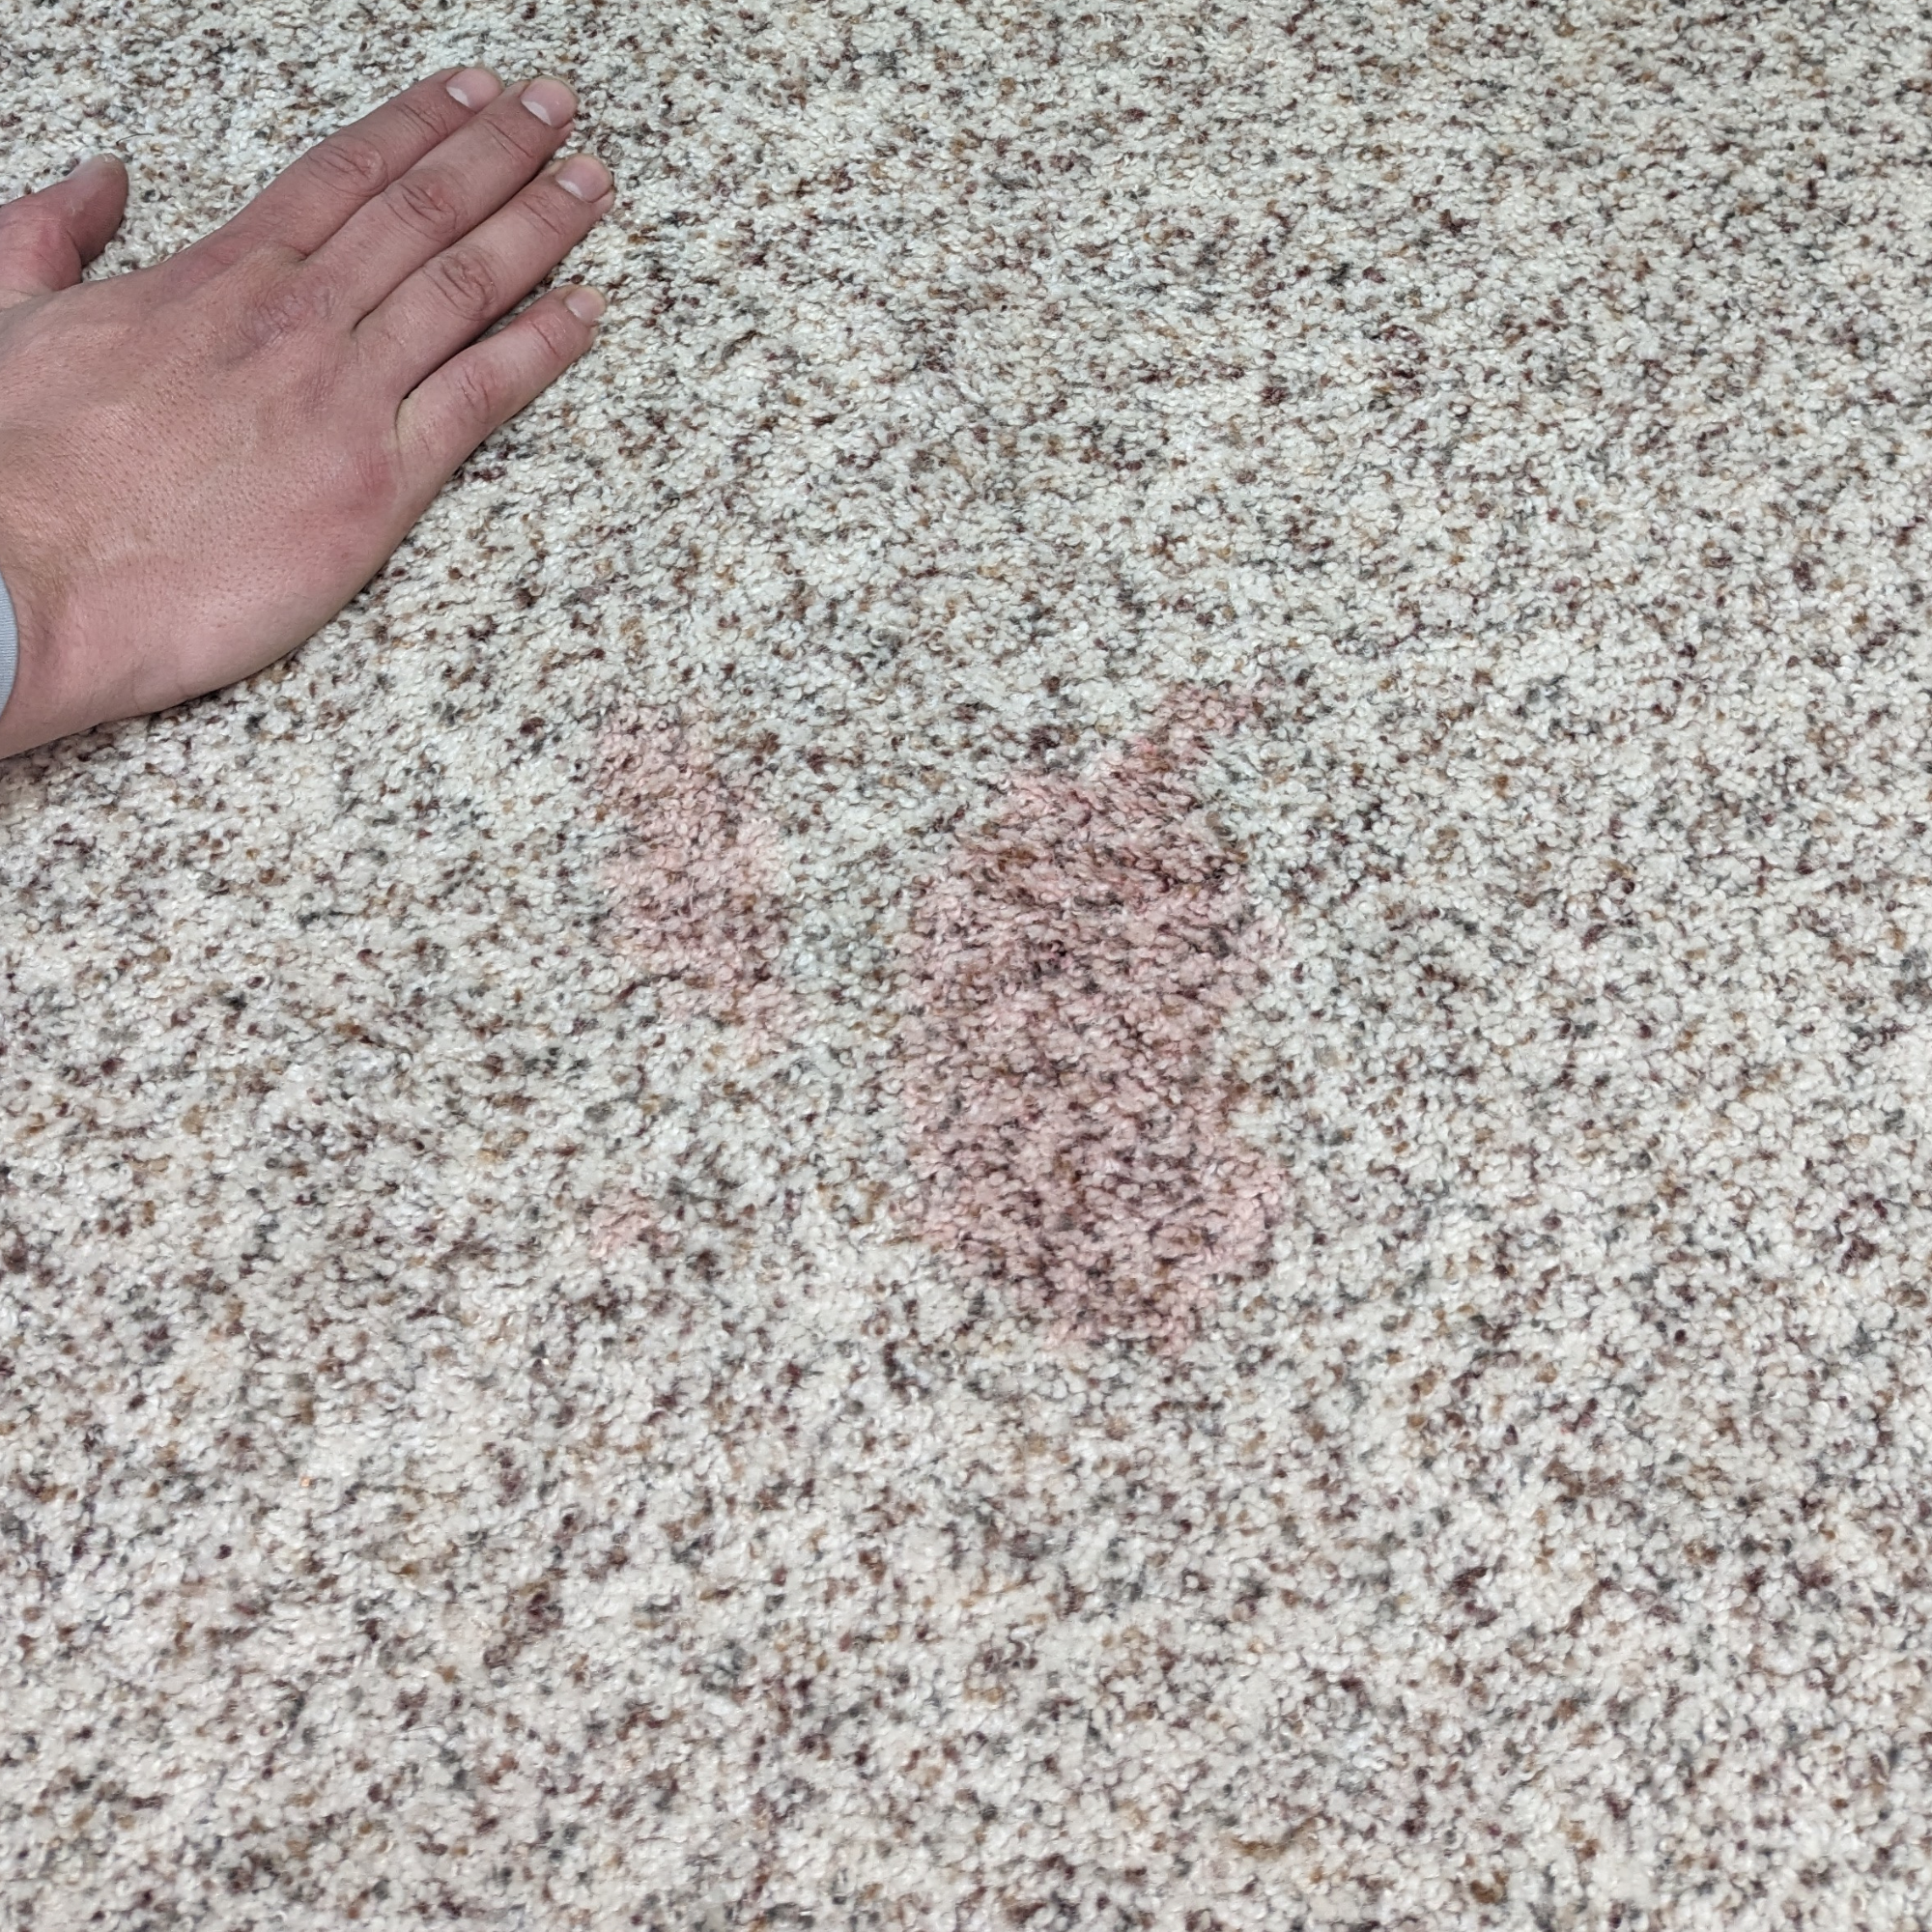 Specialty stain removal in portland